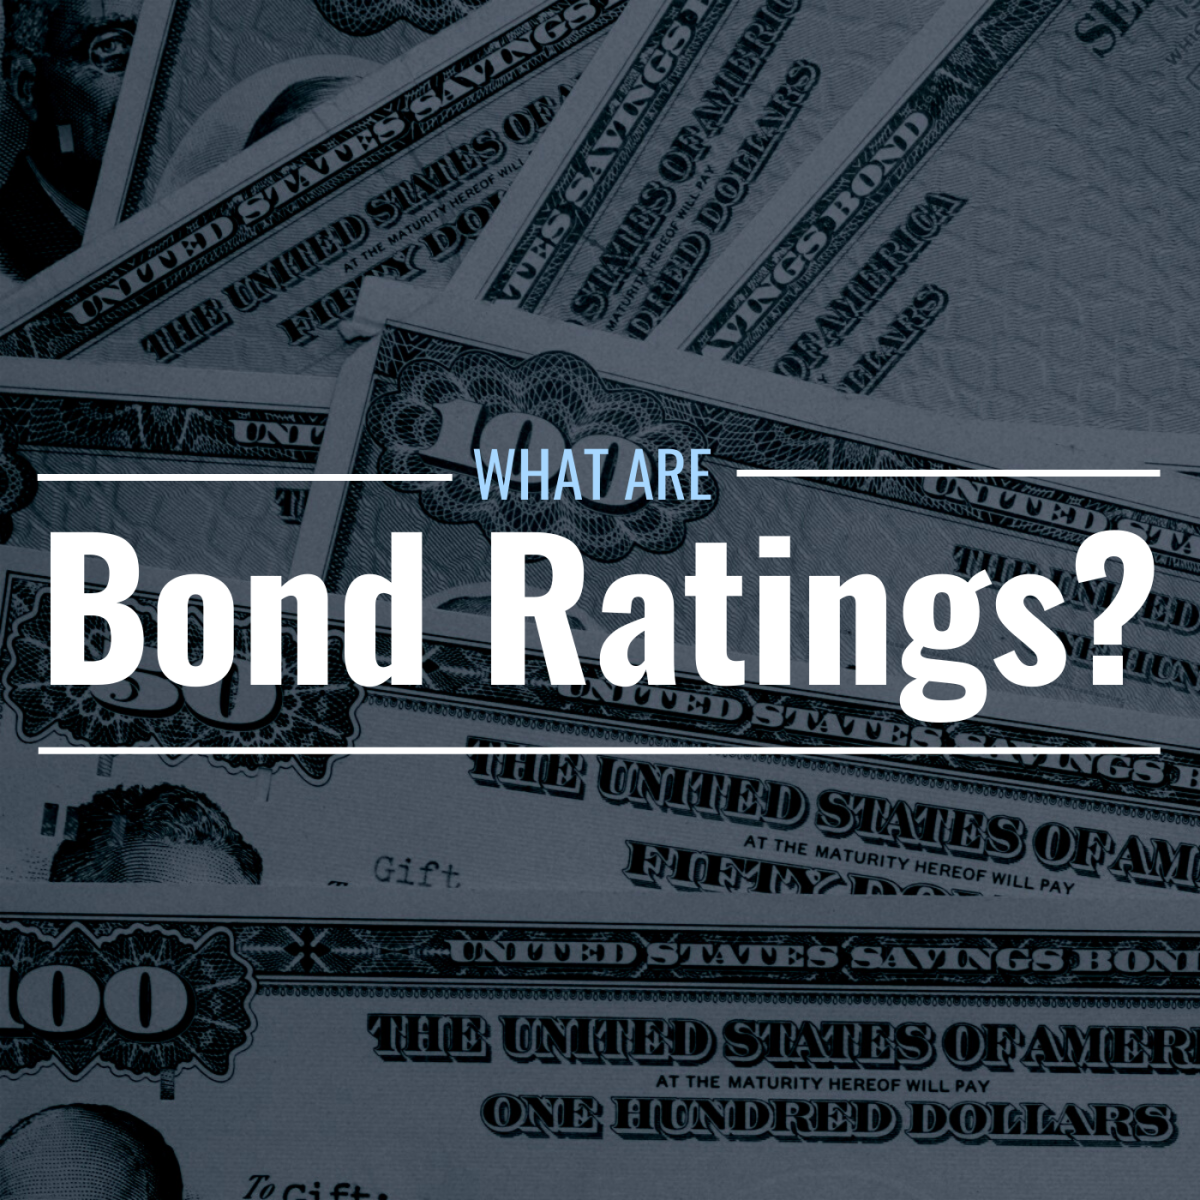 Image of bonds with text overlay: "What Are Bond Ratings?"